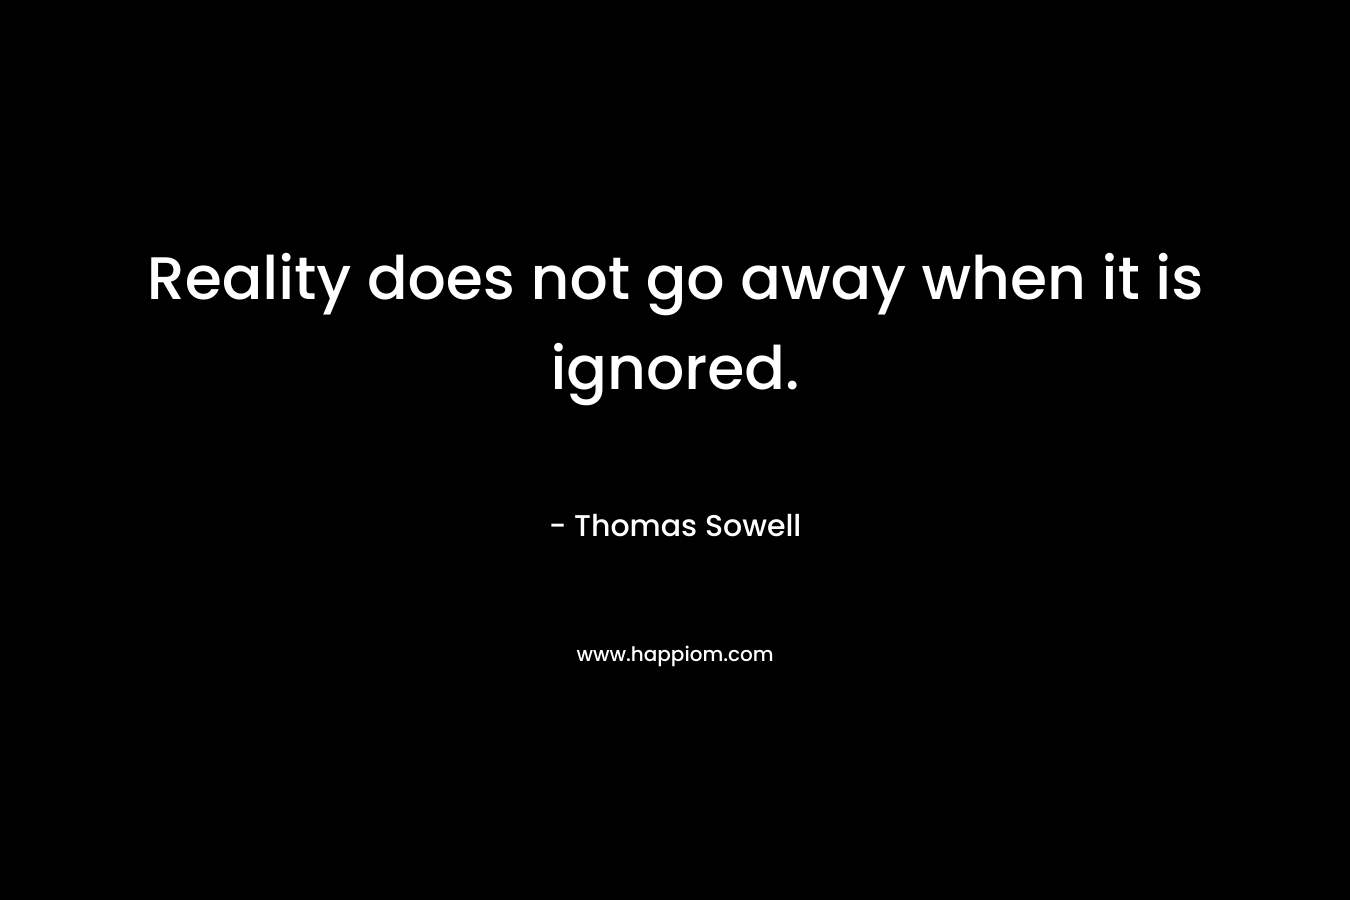 Reality does not go away when it is ignored. – Thomas Sowell